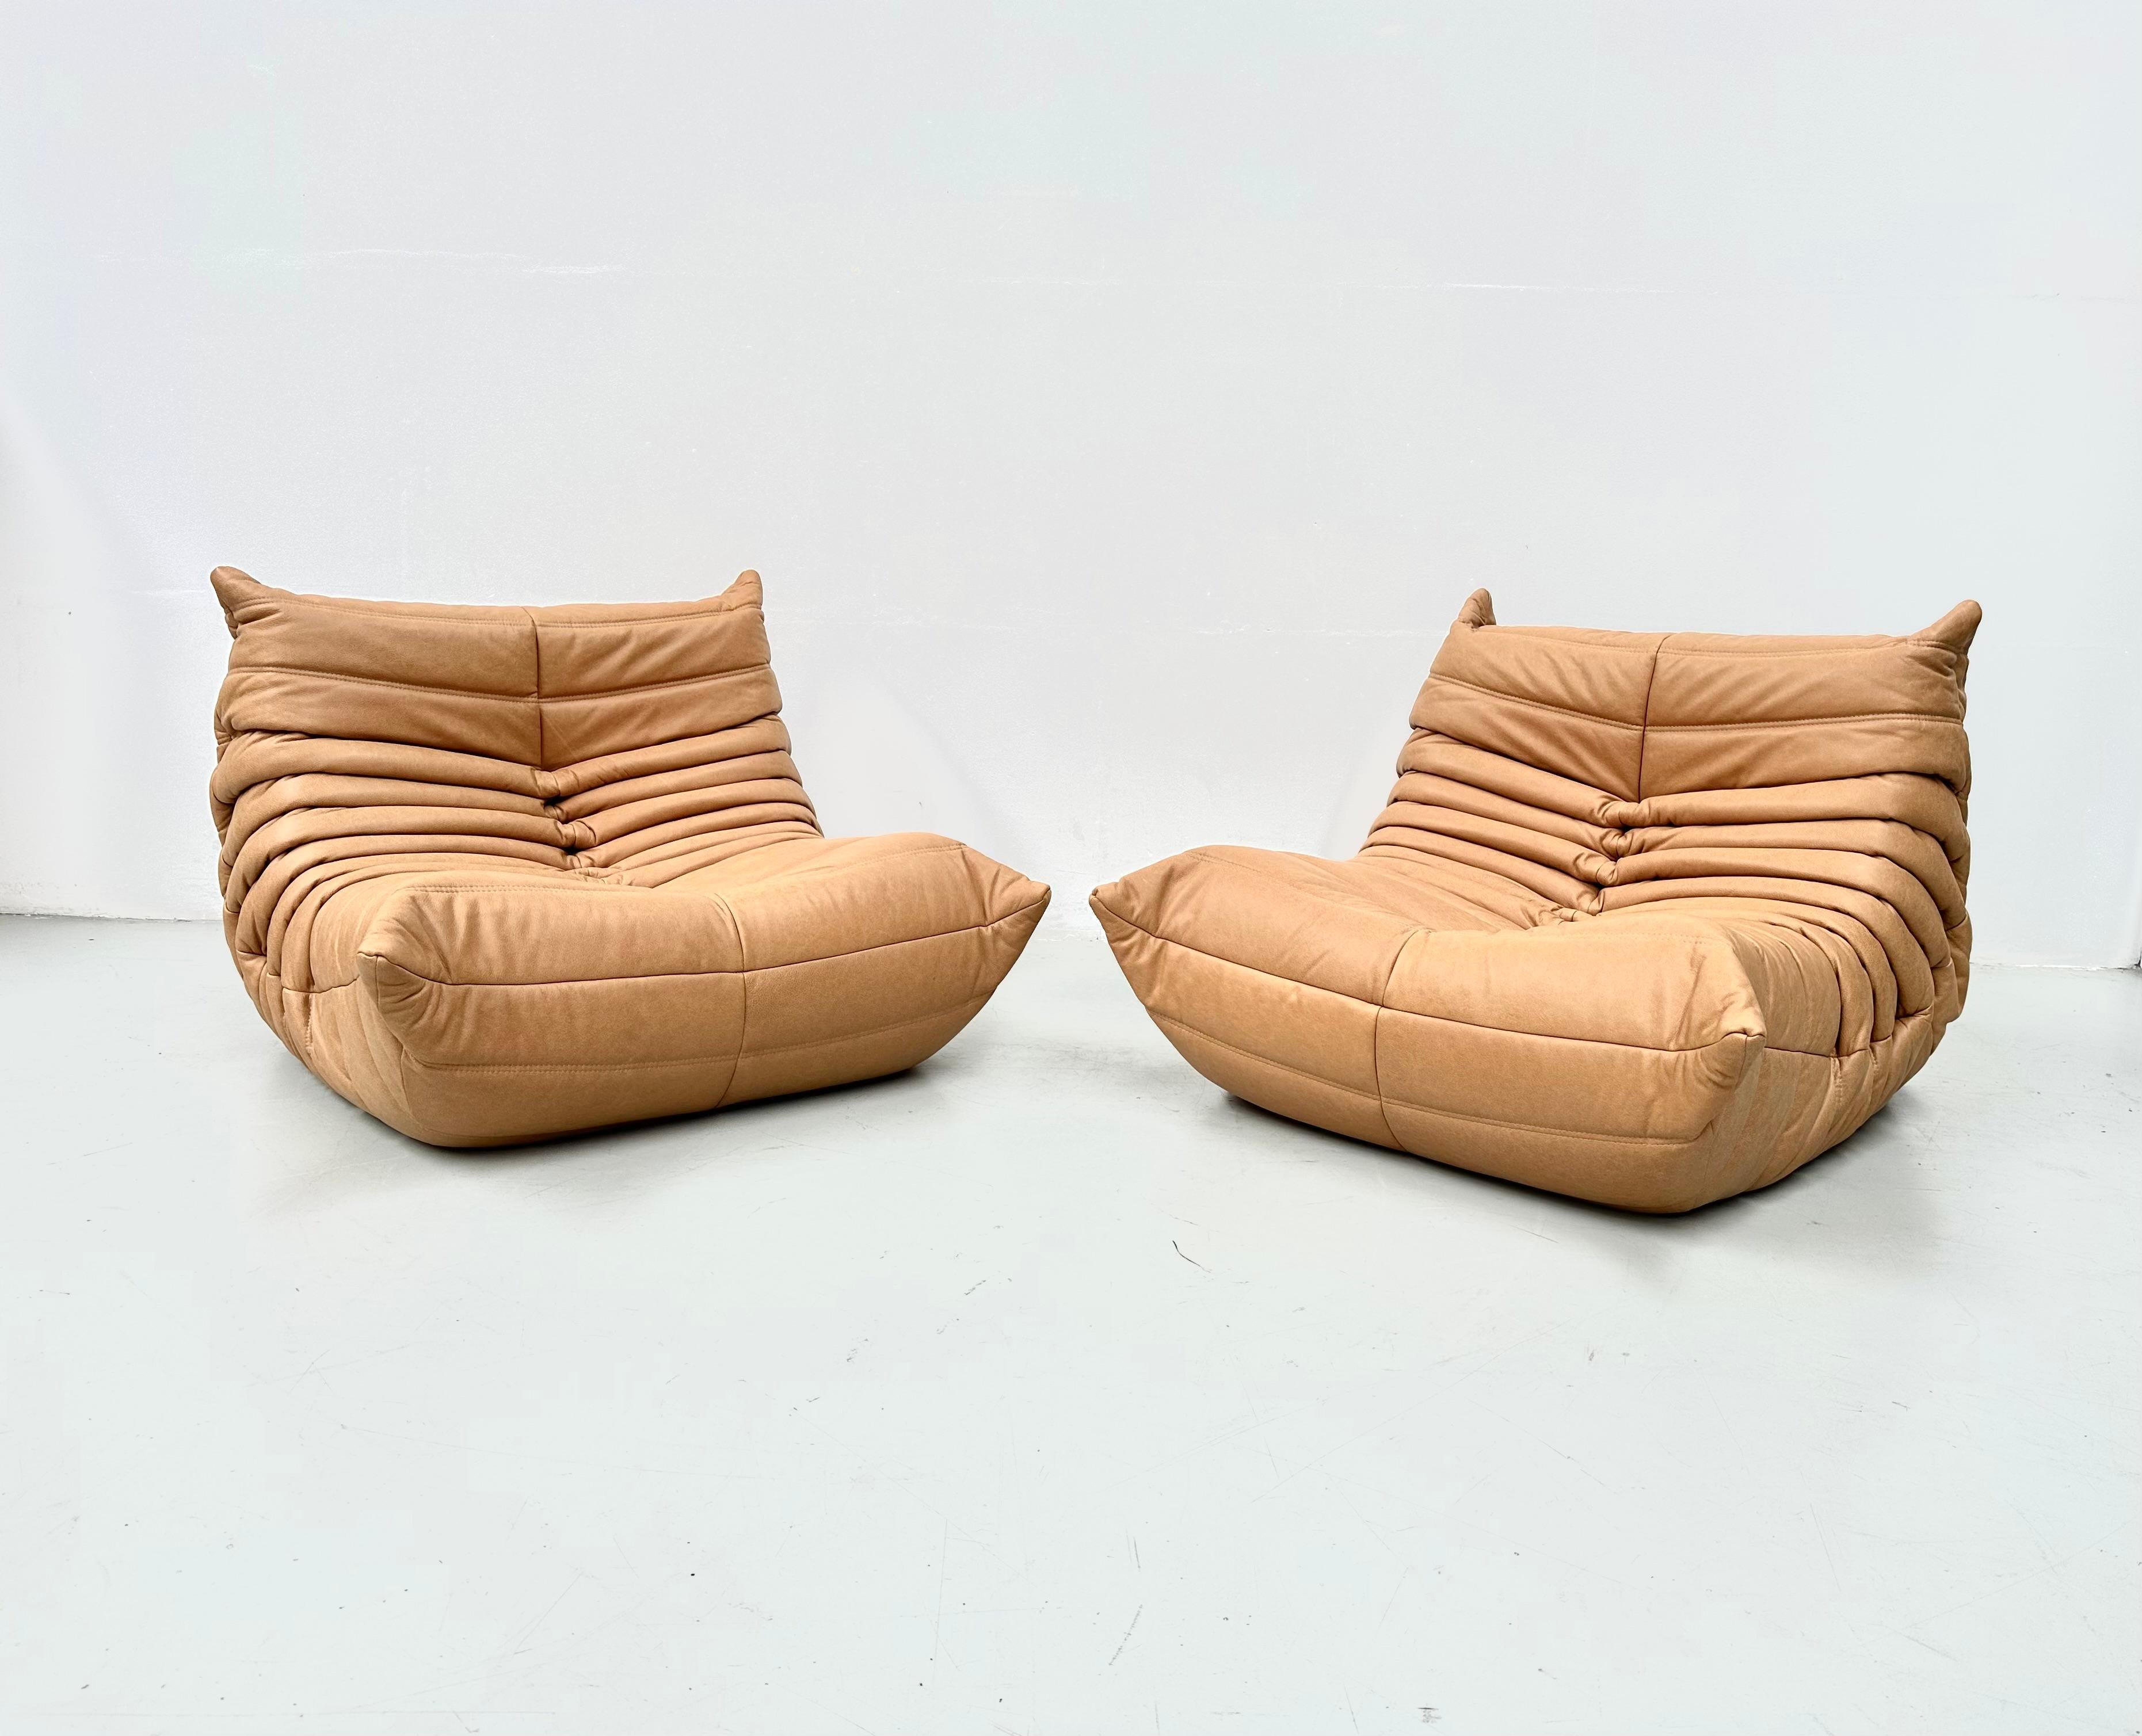 The Togo was designed by Michel Ducaroy in 1973 for Ligne Roset. It is the first chair ever made only of foam and leather. The innerwork consists of foam in 5 different densities.